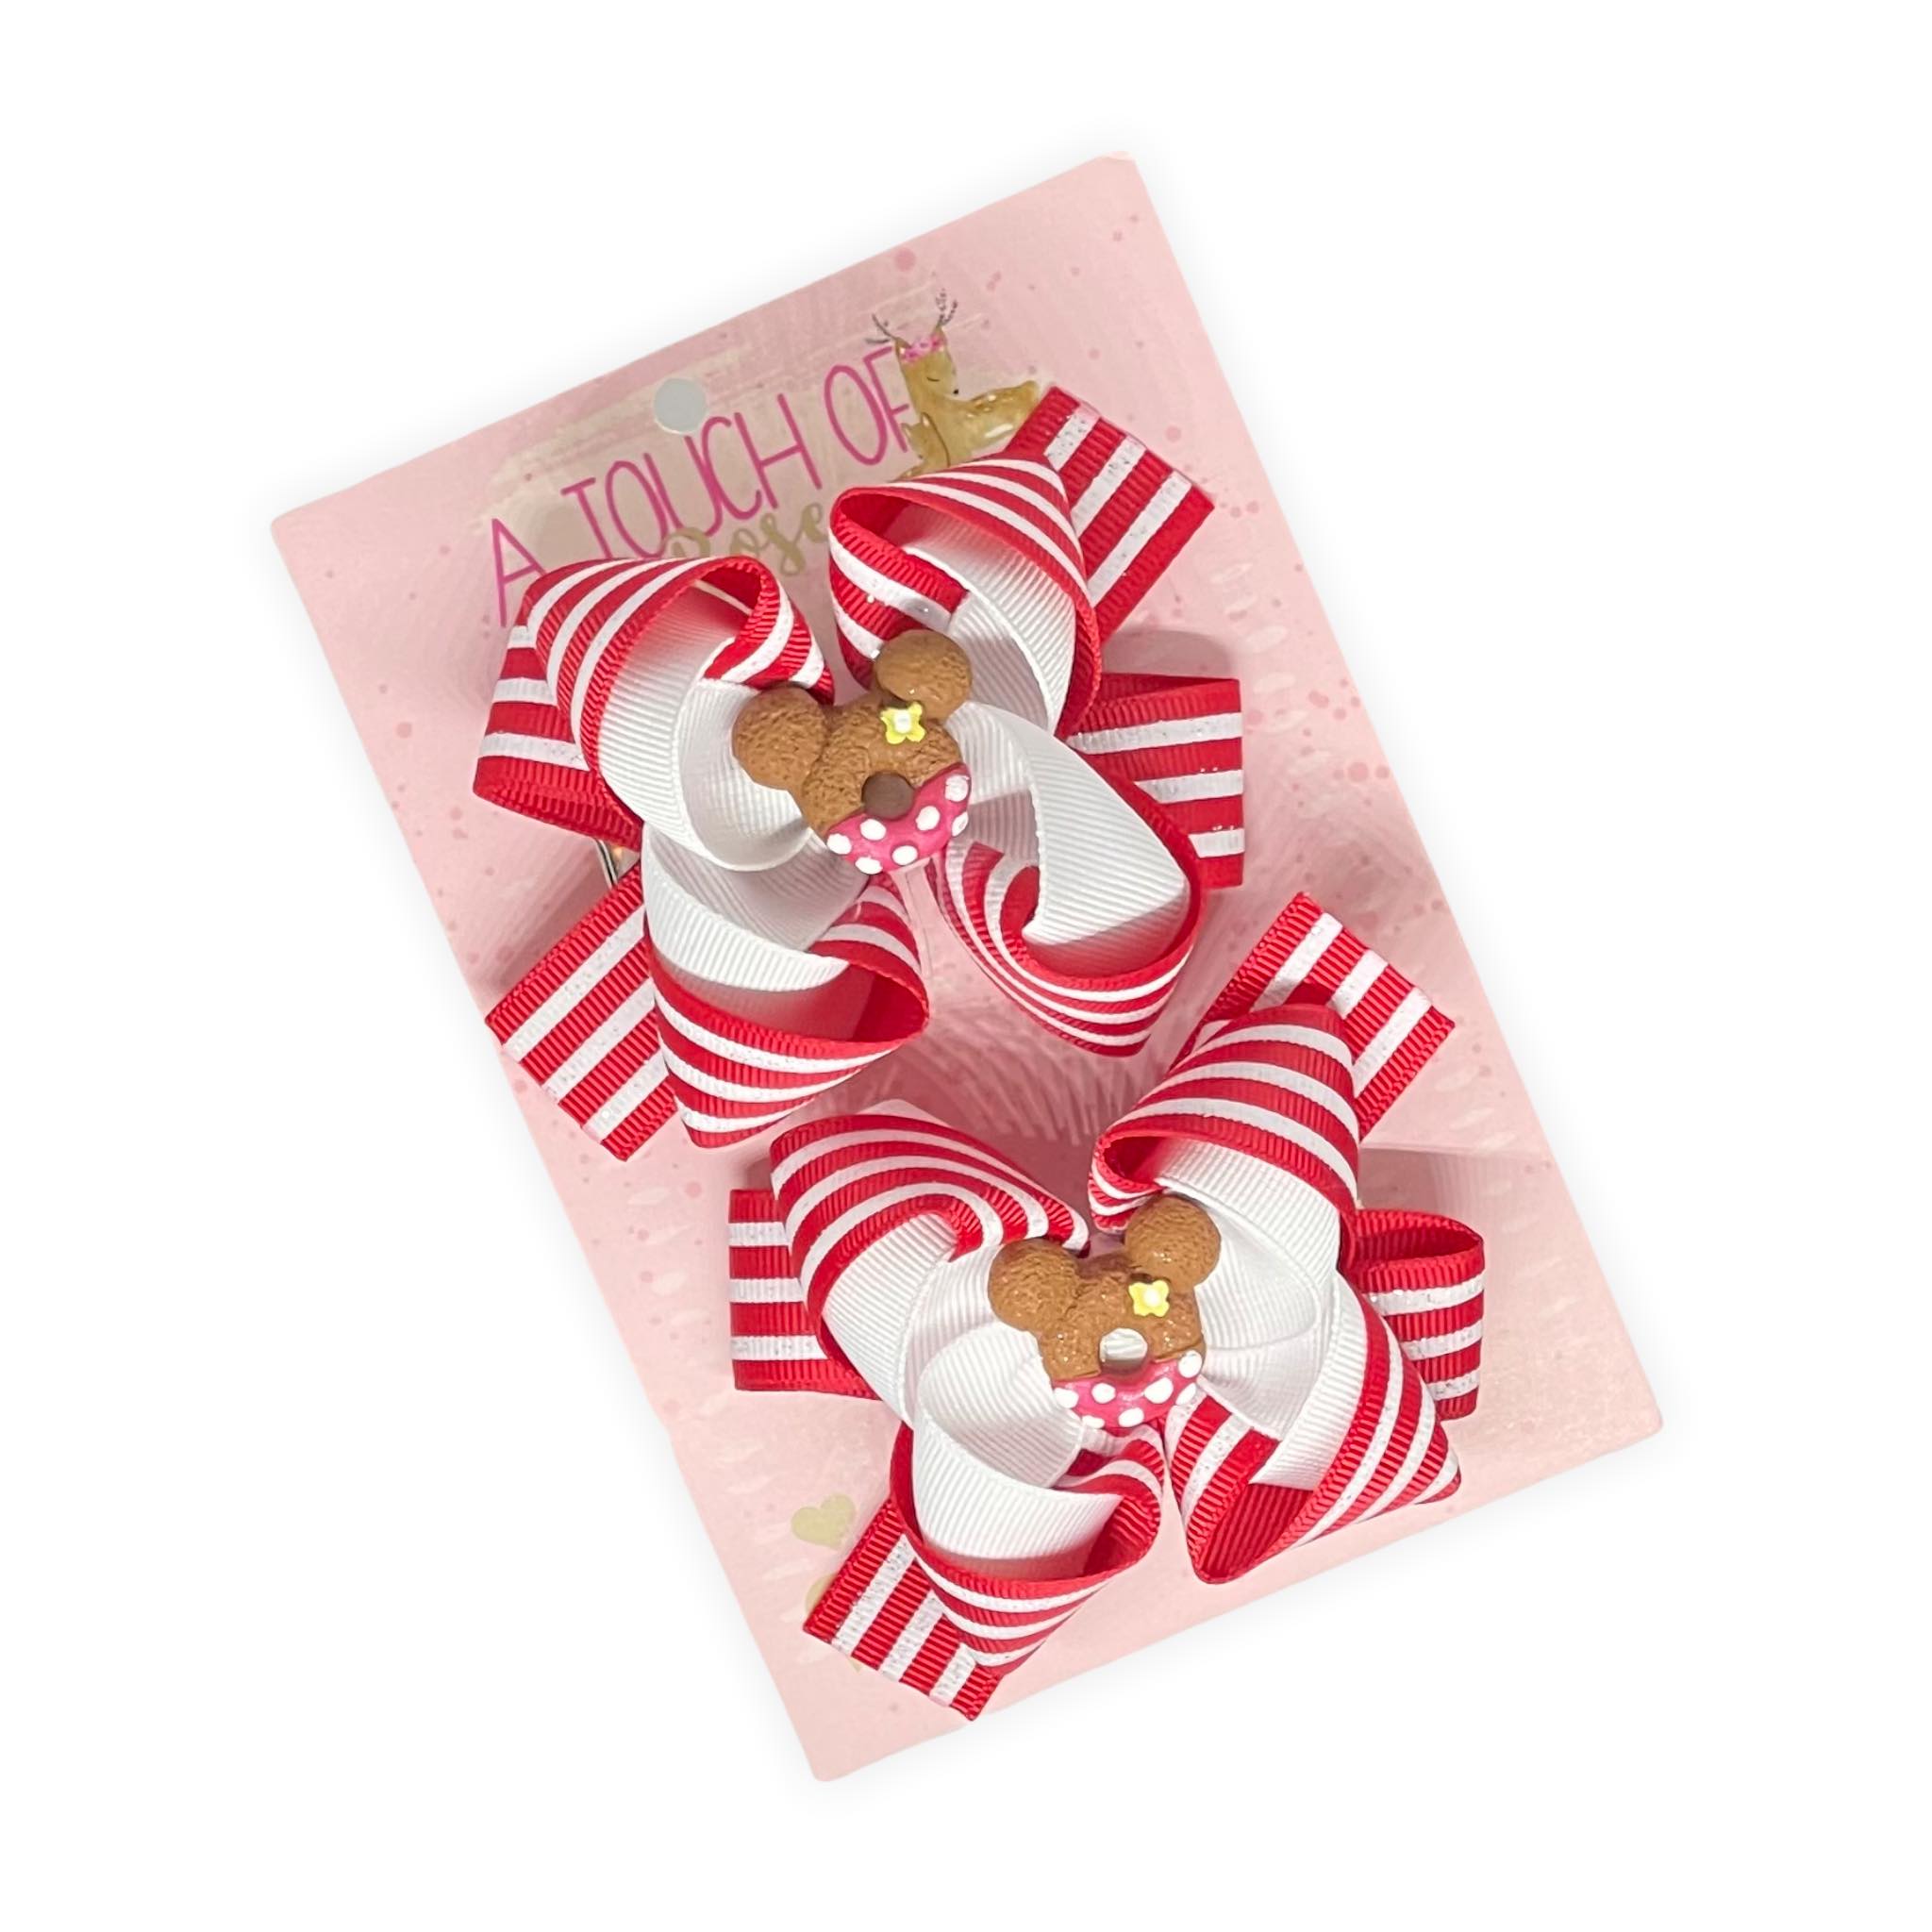 "Minnie Mouse" Inspired Red and White Striped Hair Bow